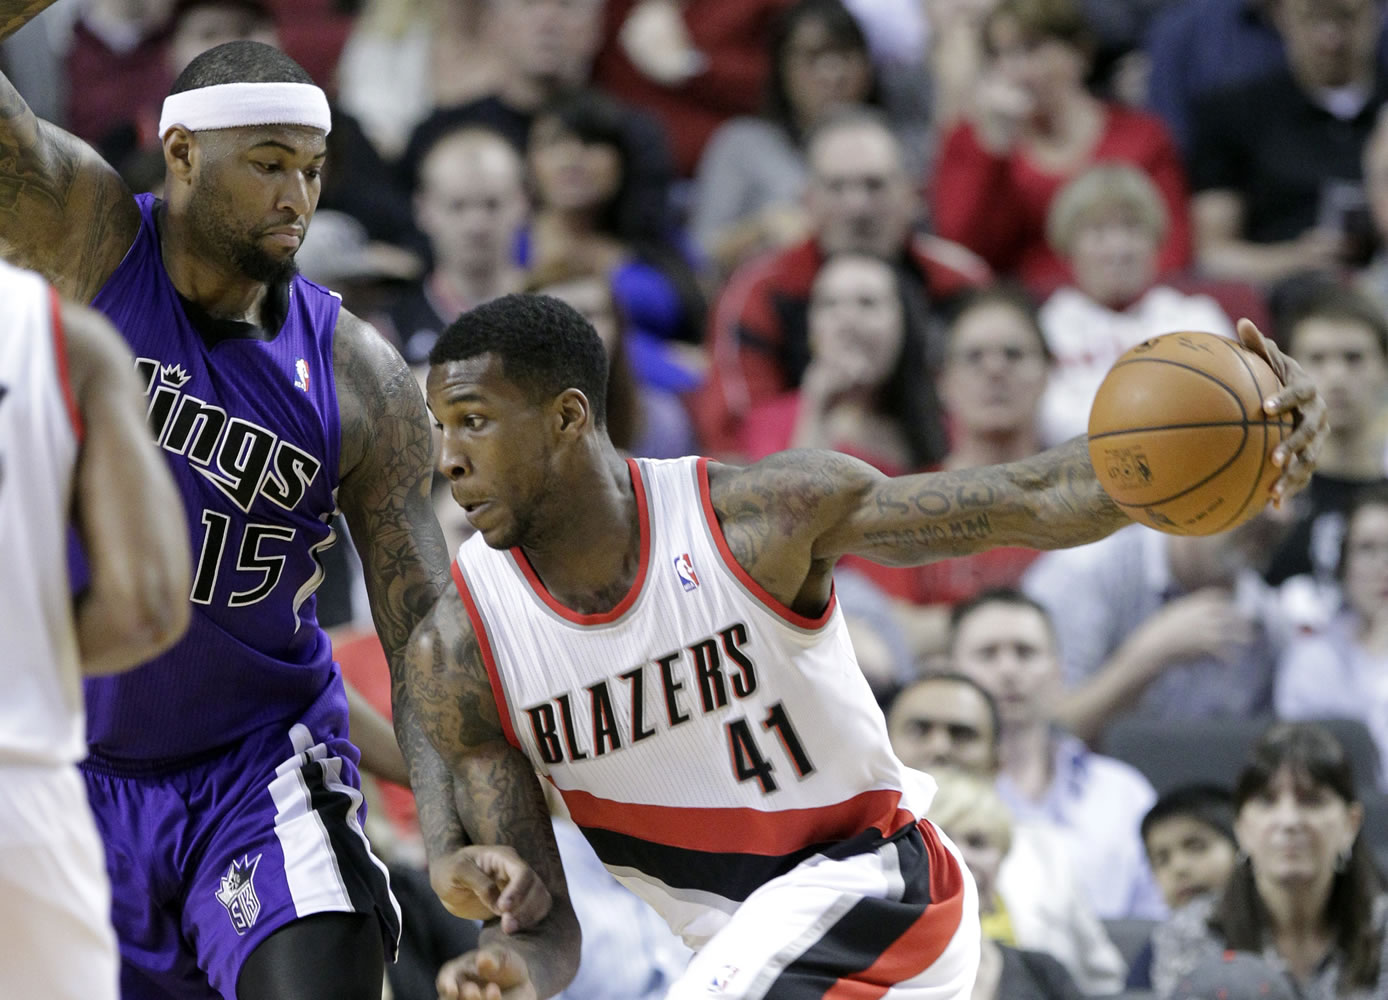 Portland Trail Blazers forward Thomas Robinson, right, drives against Sacramento center DeMarcus Cousins during the first half Wednesday in Portland.